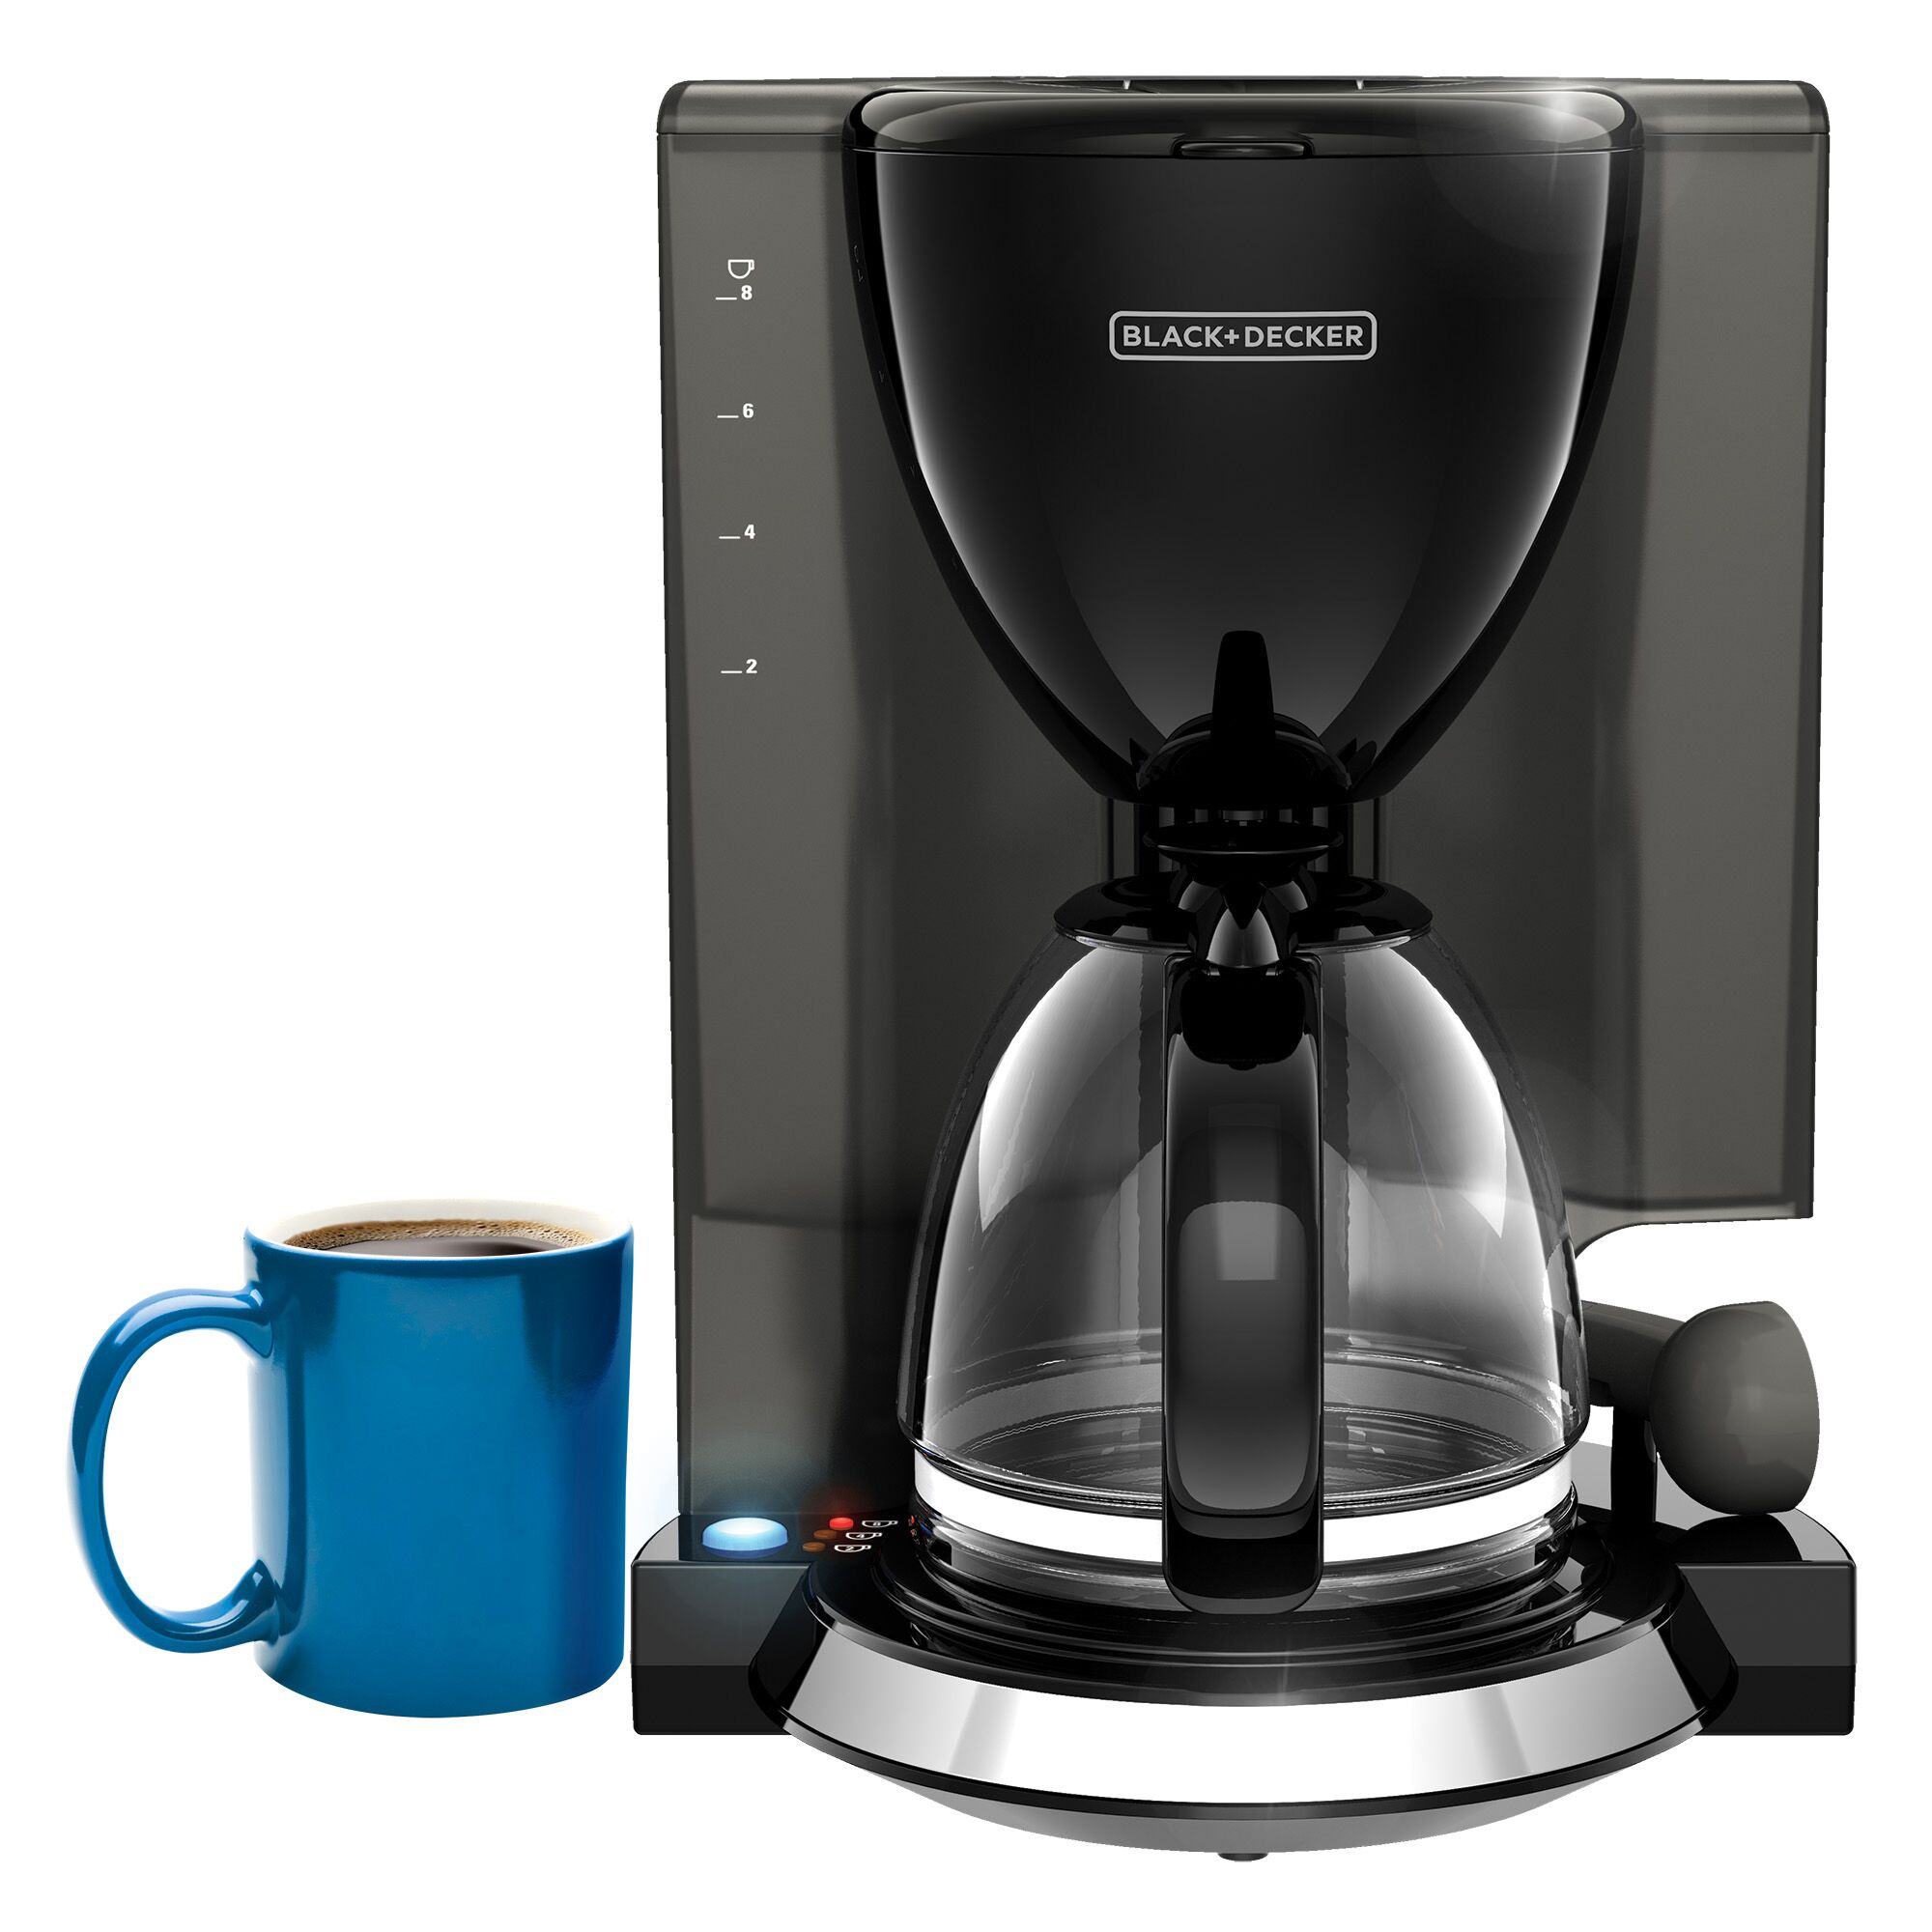 BLACK+DECKER 8 cup coffee maker next to blue coffee cup